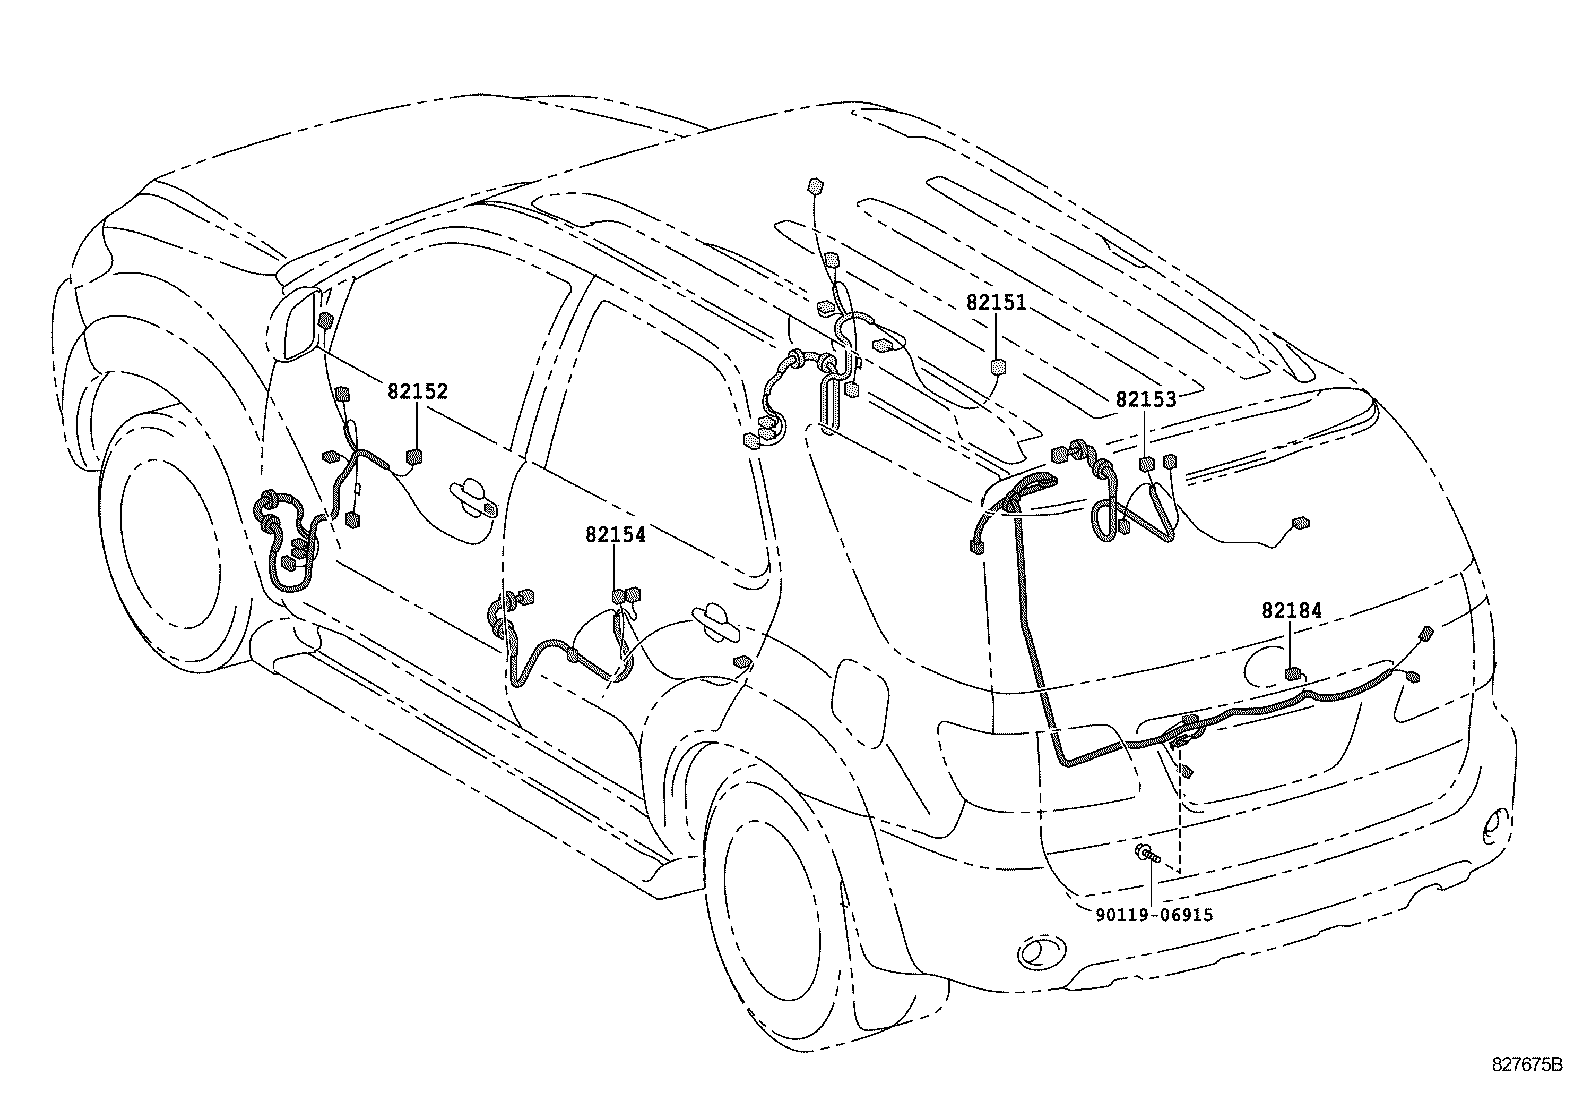  FORTUNER |  WIRING CLAMP